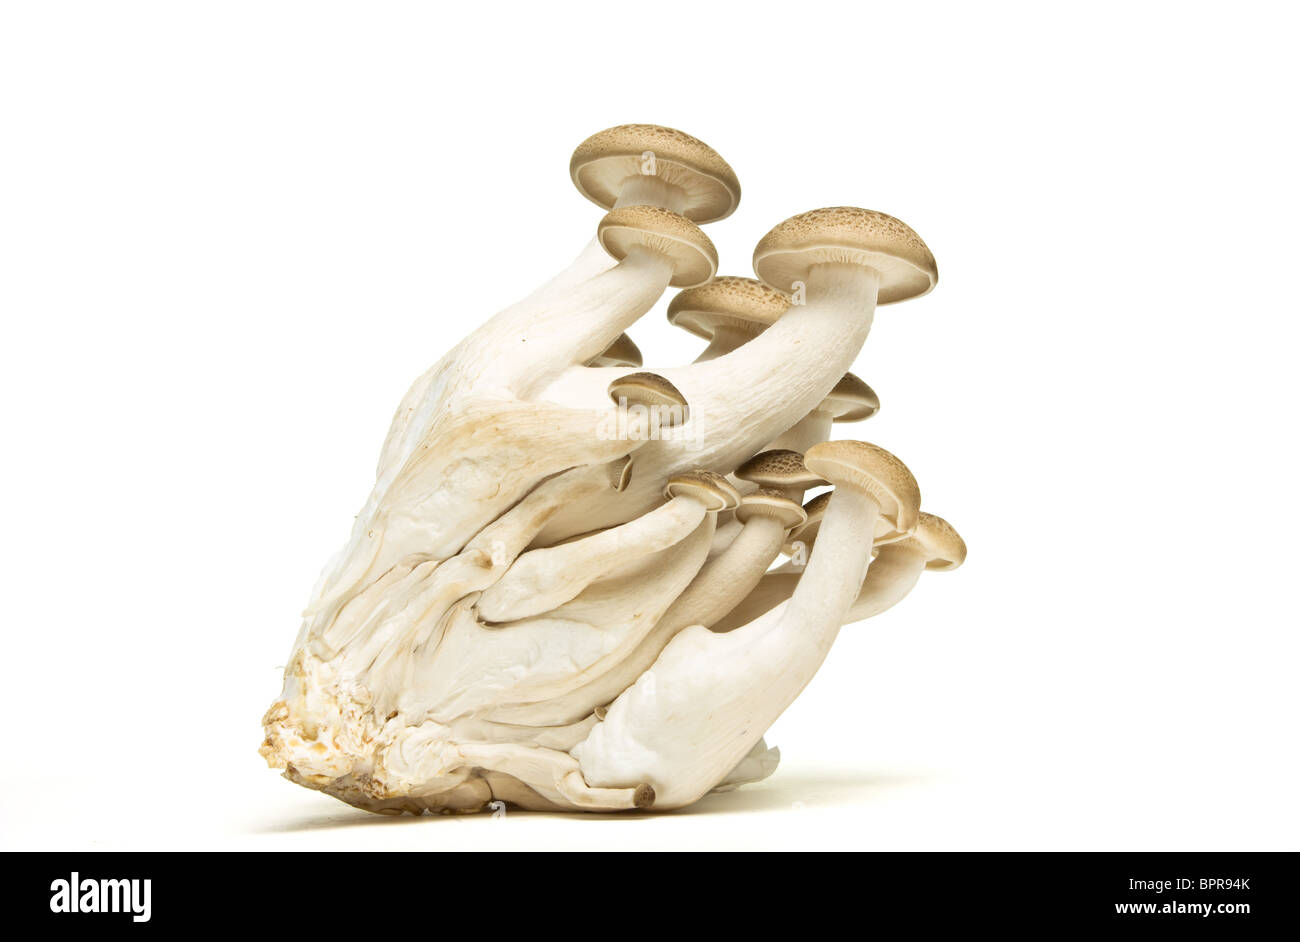 Abstract clump of Brown beech mushrooms ( Buna Shimeji) isolated on white. Stock Photo